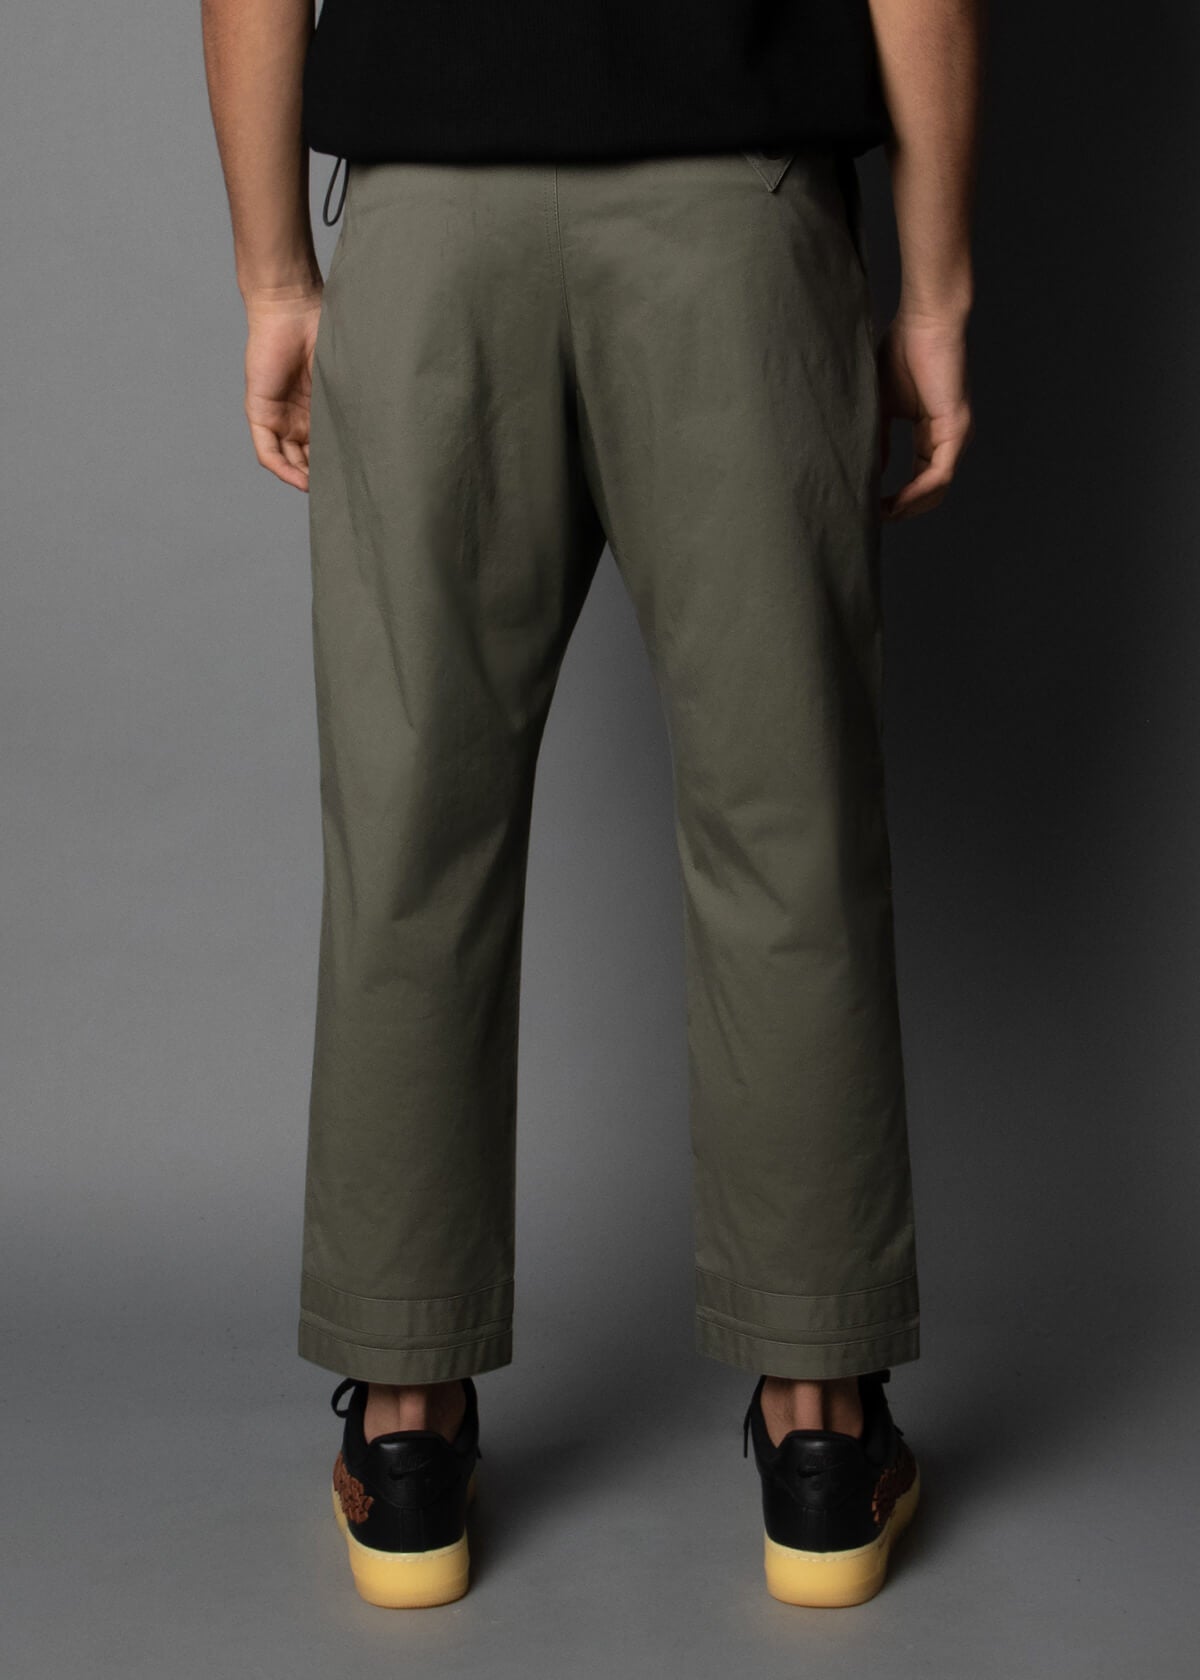 twill pants for men in an olive color